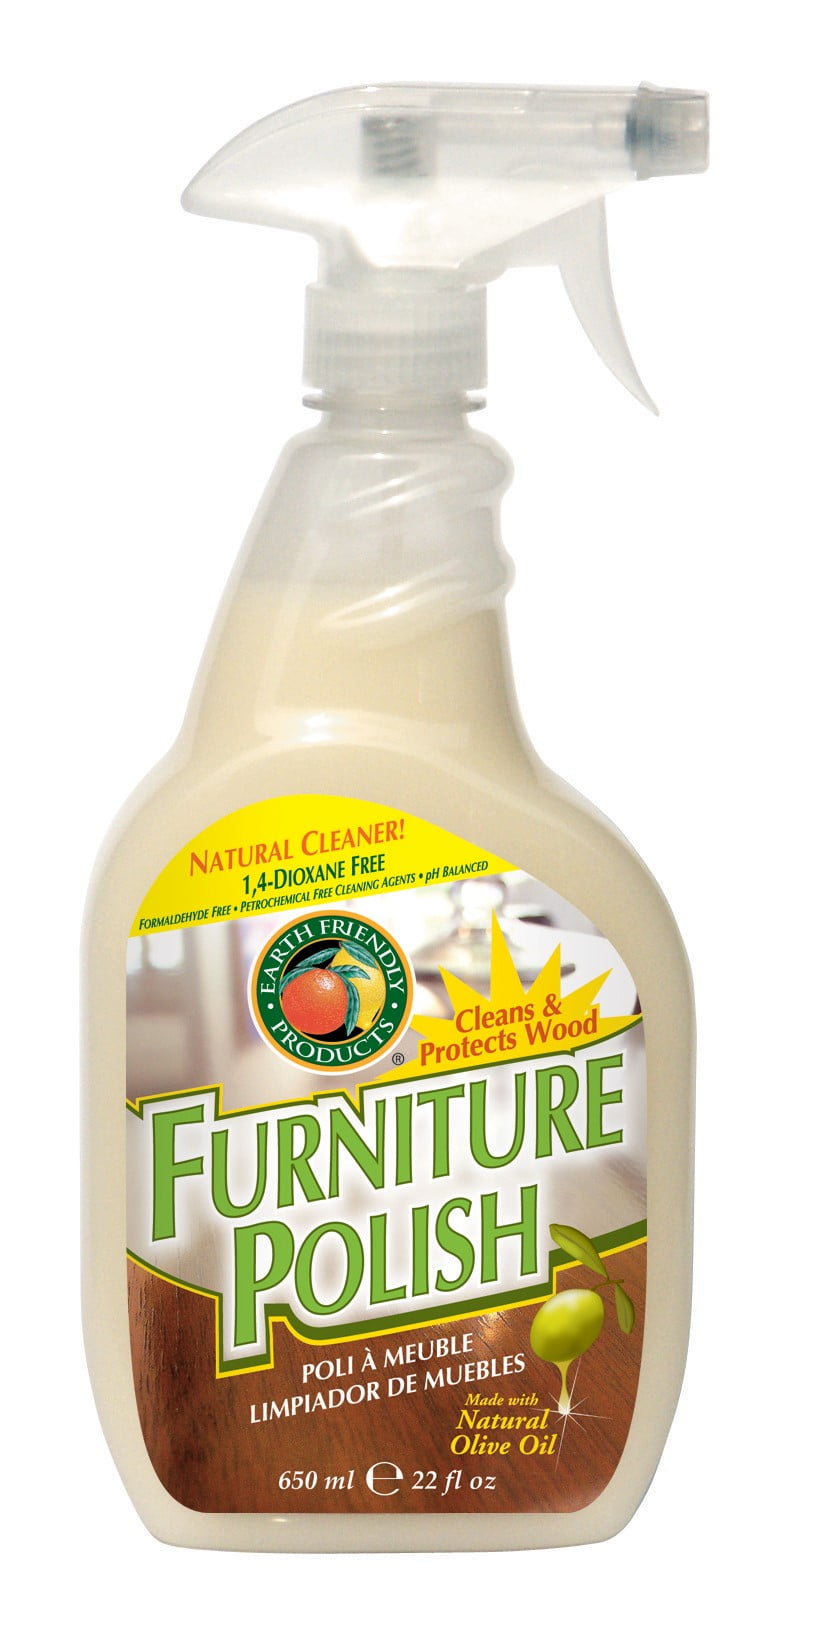 Ecos Furniture Polish Cleans and Protects Wood Made with Olive Oil 22 Fl Oz Bottle